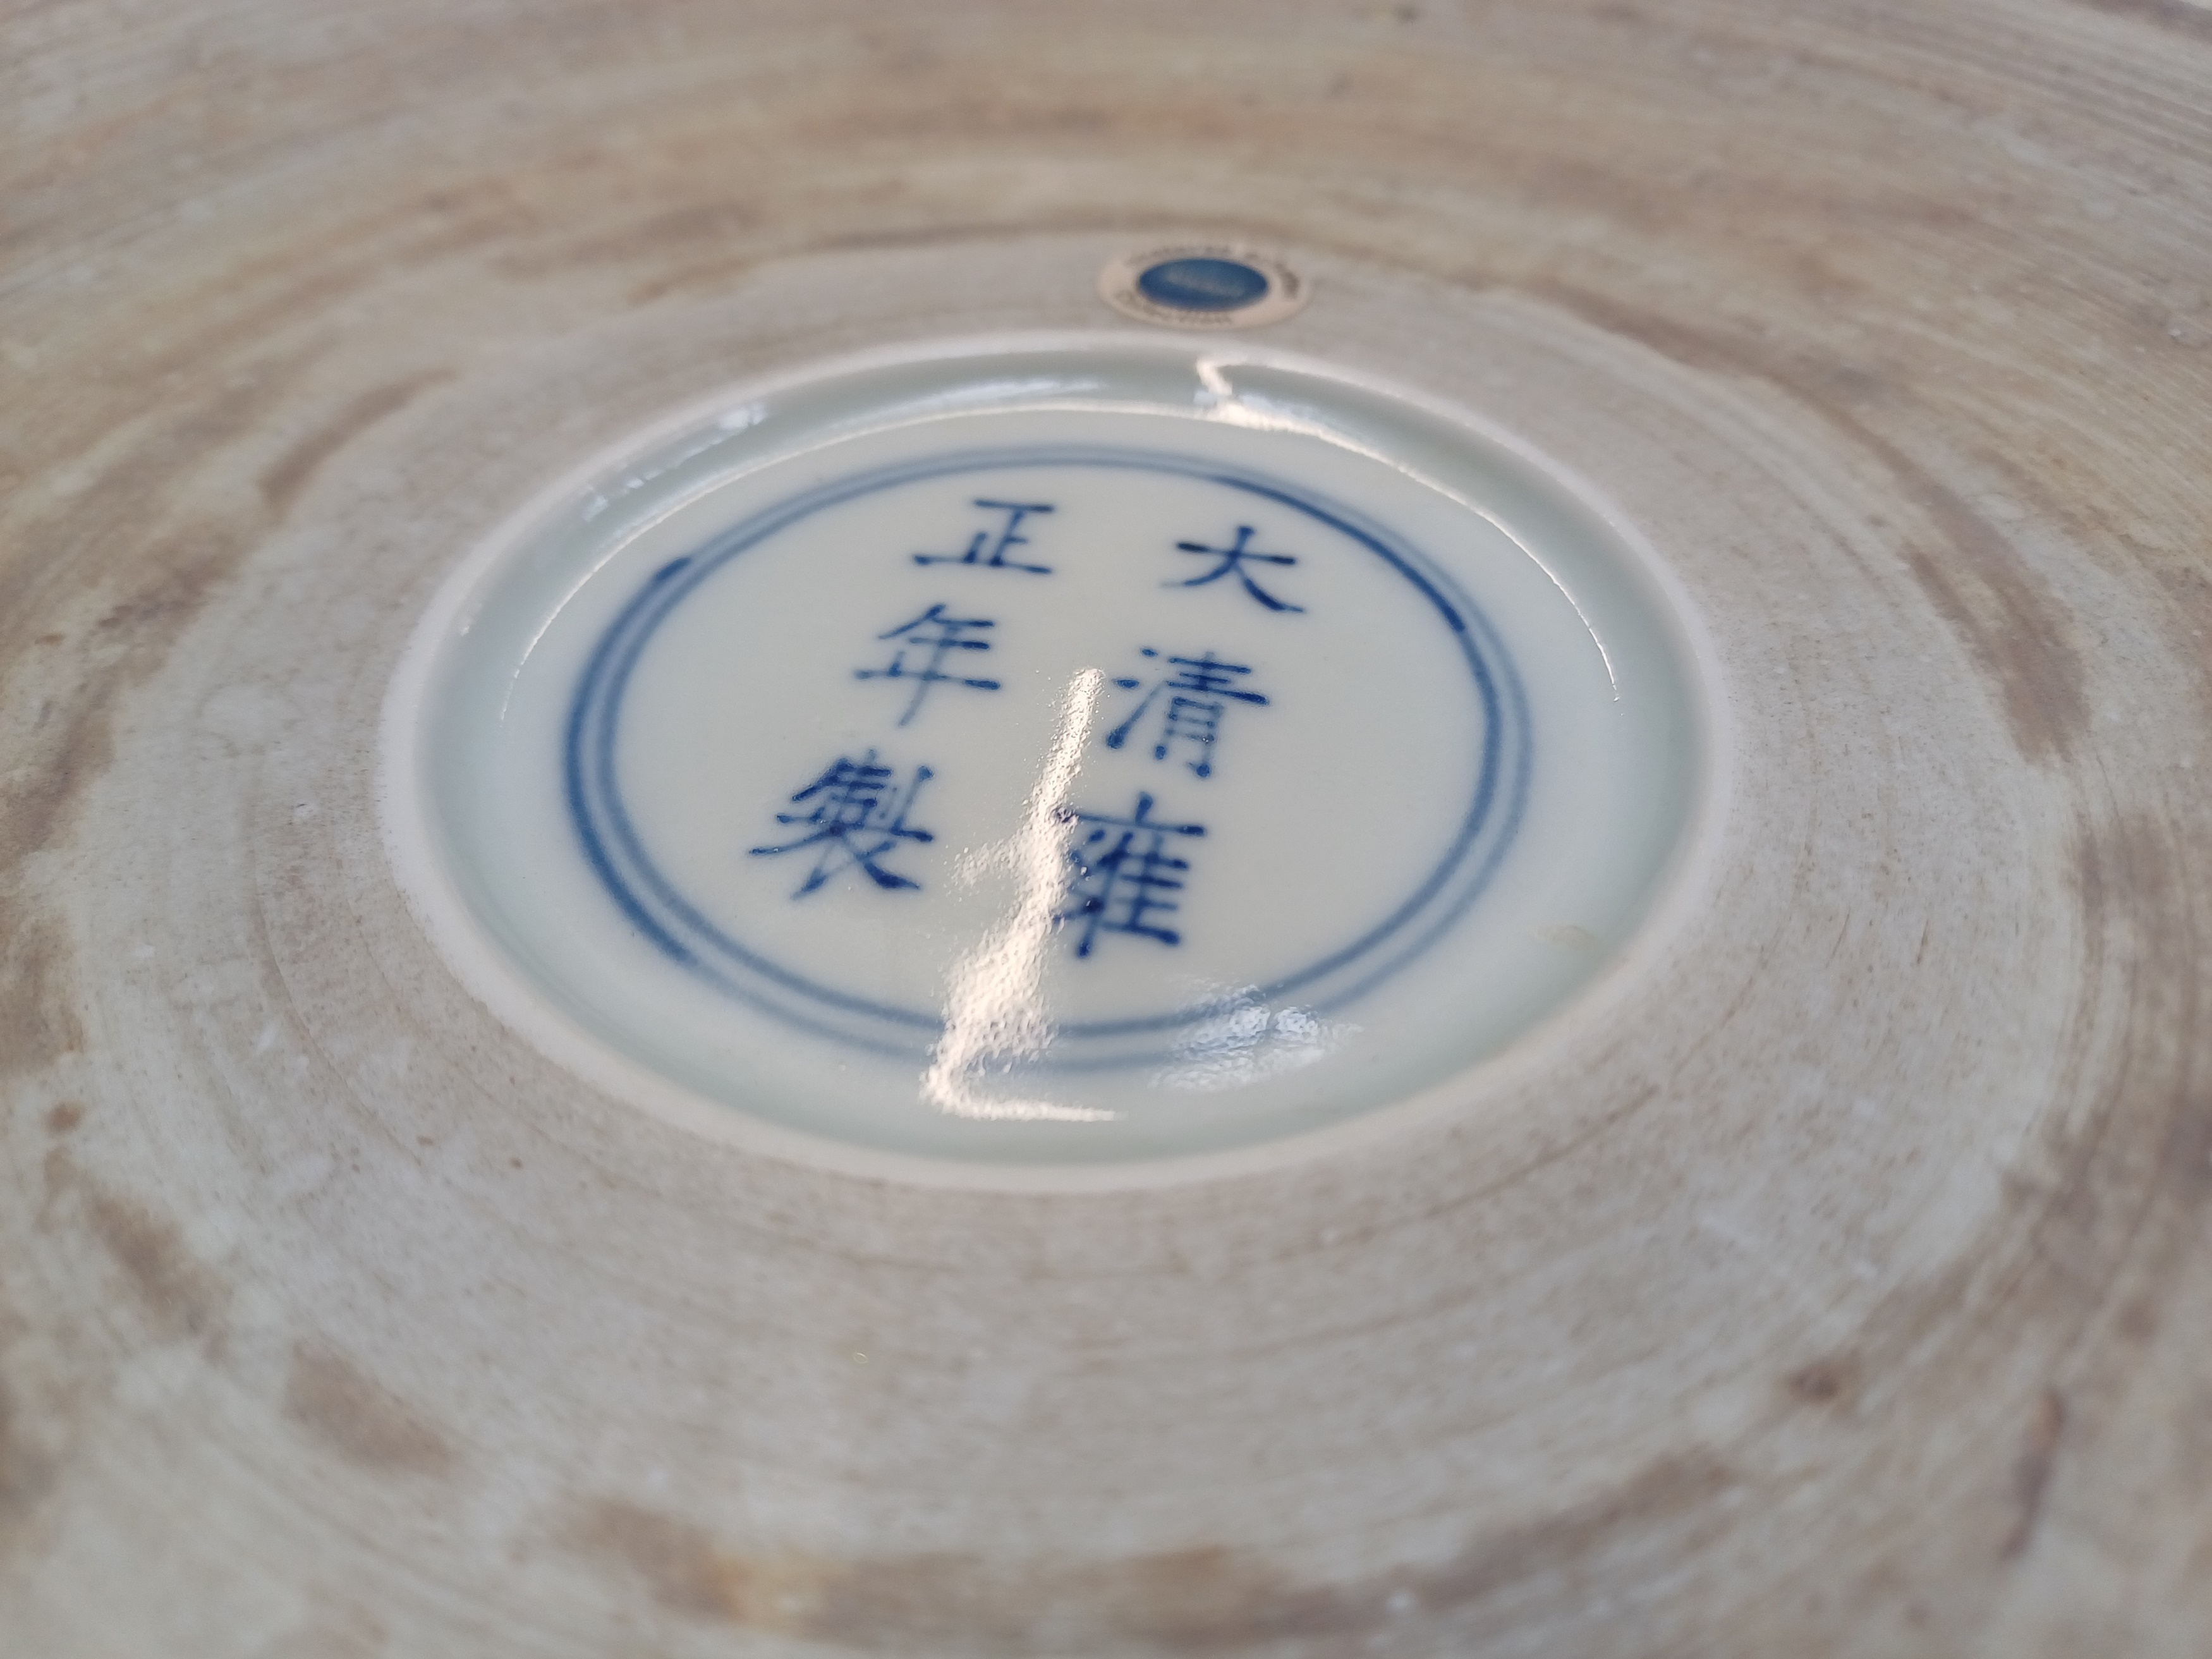 A CHINESE MING-STYLE BLUE AND WHITE 'LOTUS' BASIN 明式青花纏枝蓮紋盆 《大清雍正年製》款 - Image 9 of 14